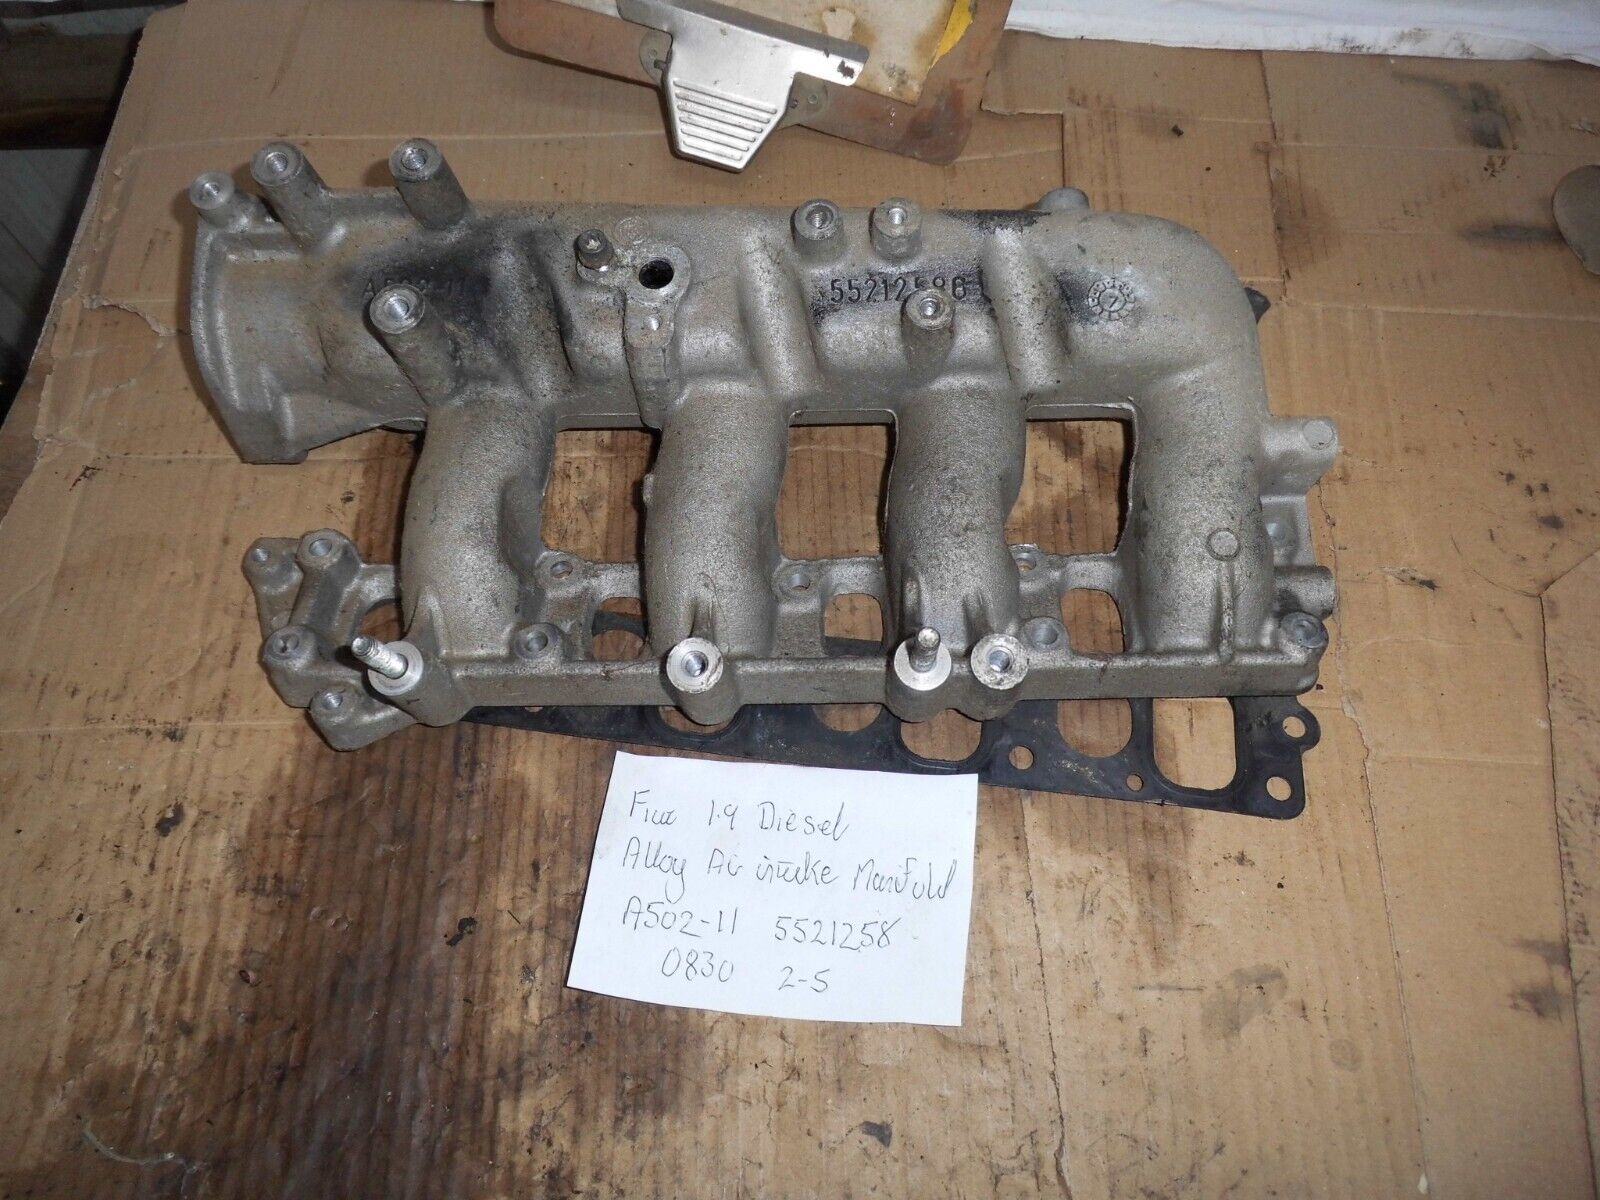 FIAT  1.9 DIESEL  ALLOY AIR INTAKE MANIFOLD A502-11-5521258 FROM MULTIPLA 2007